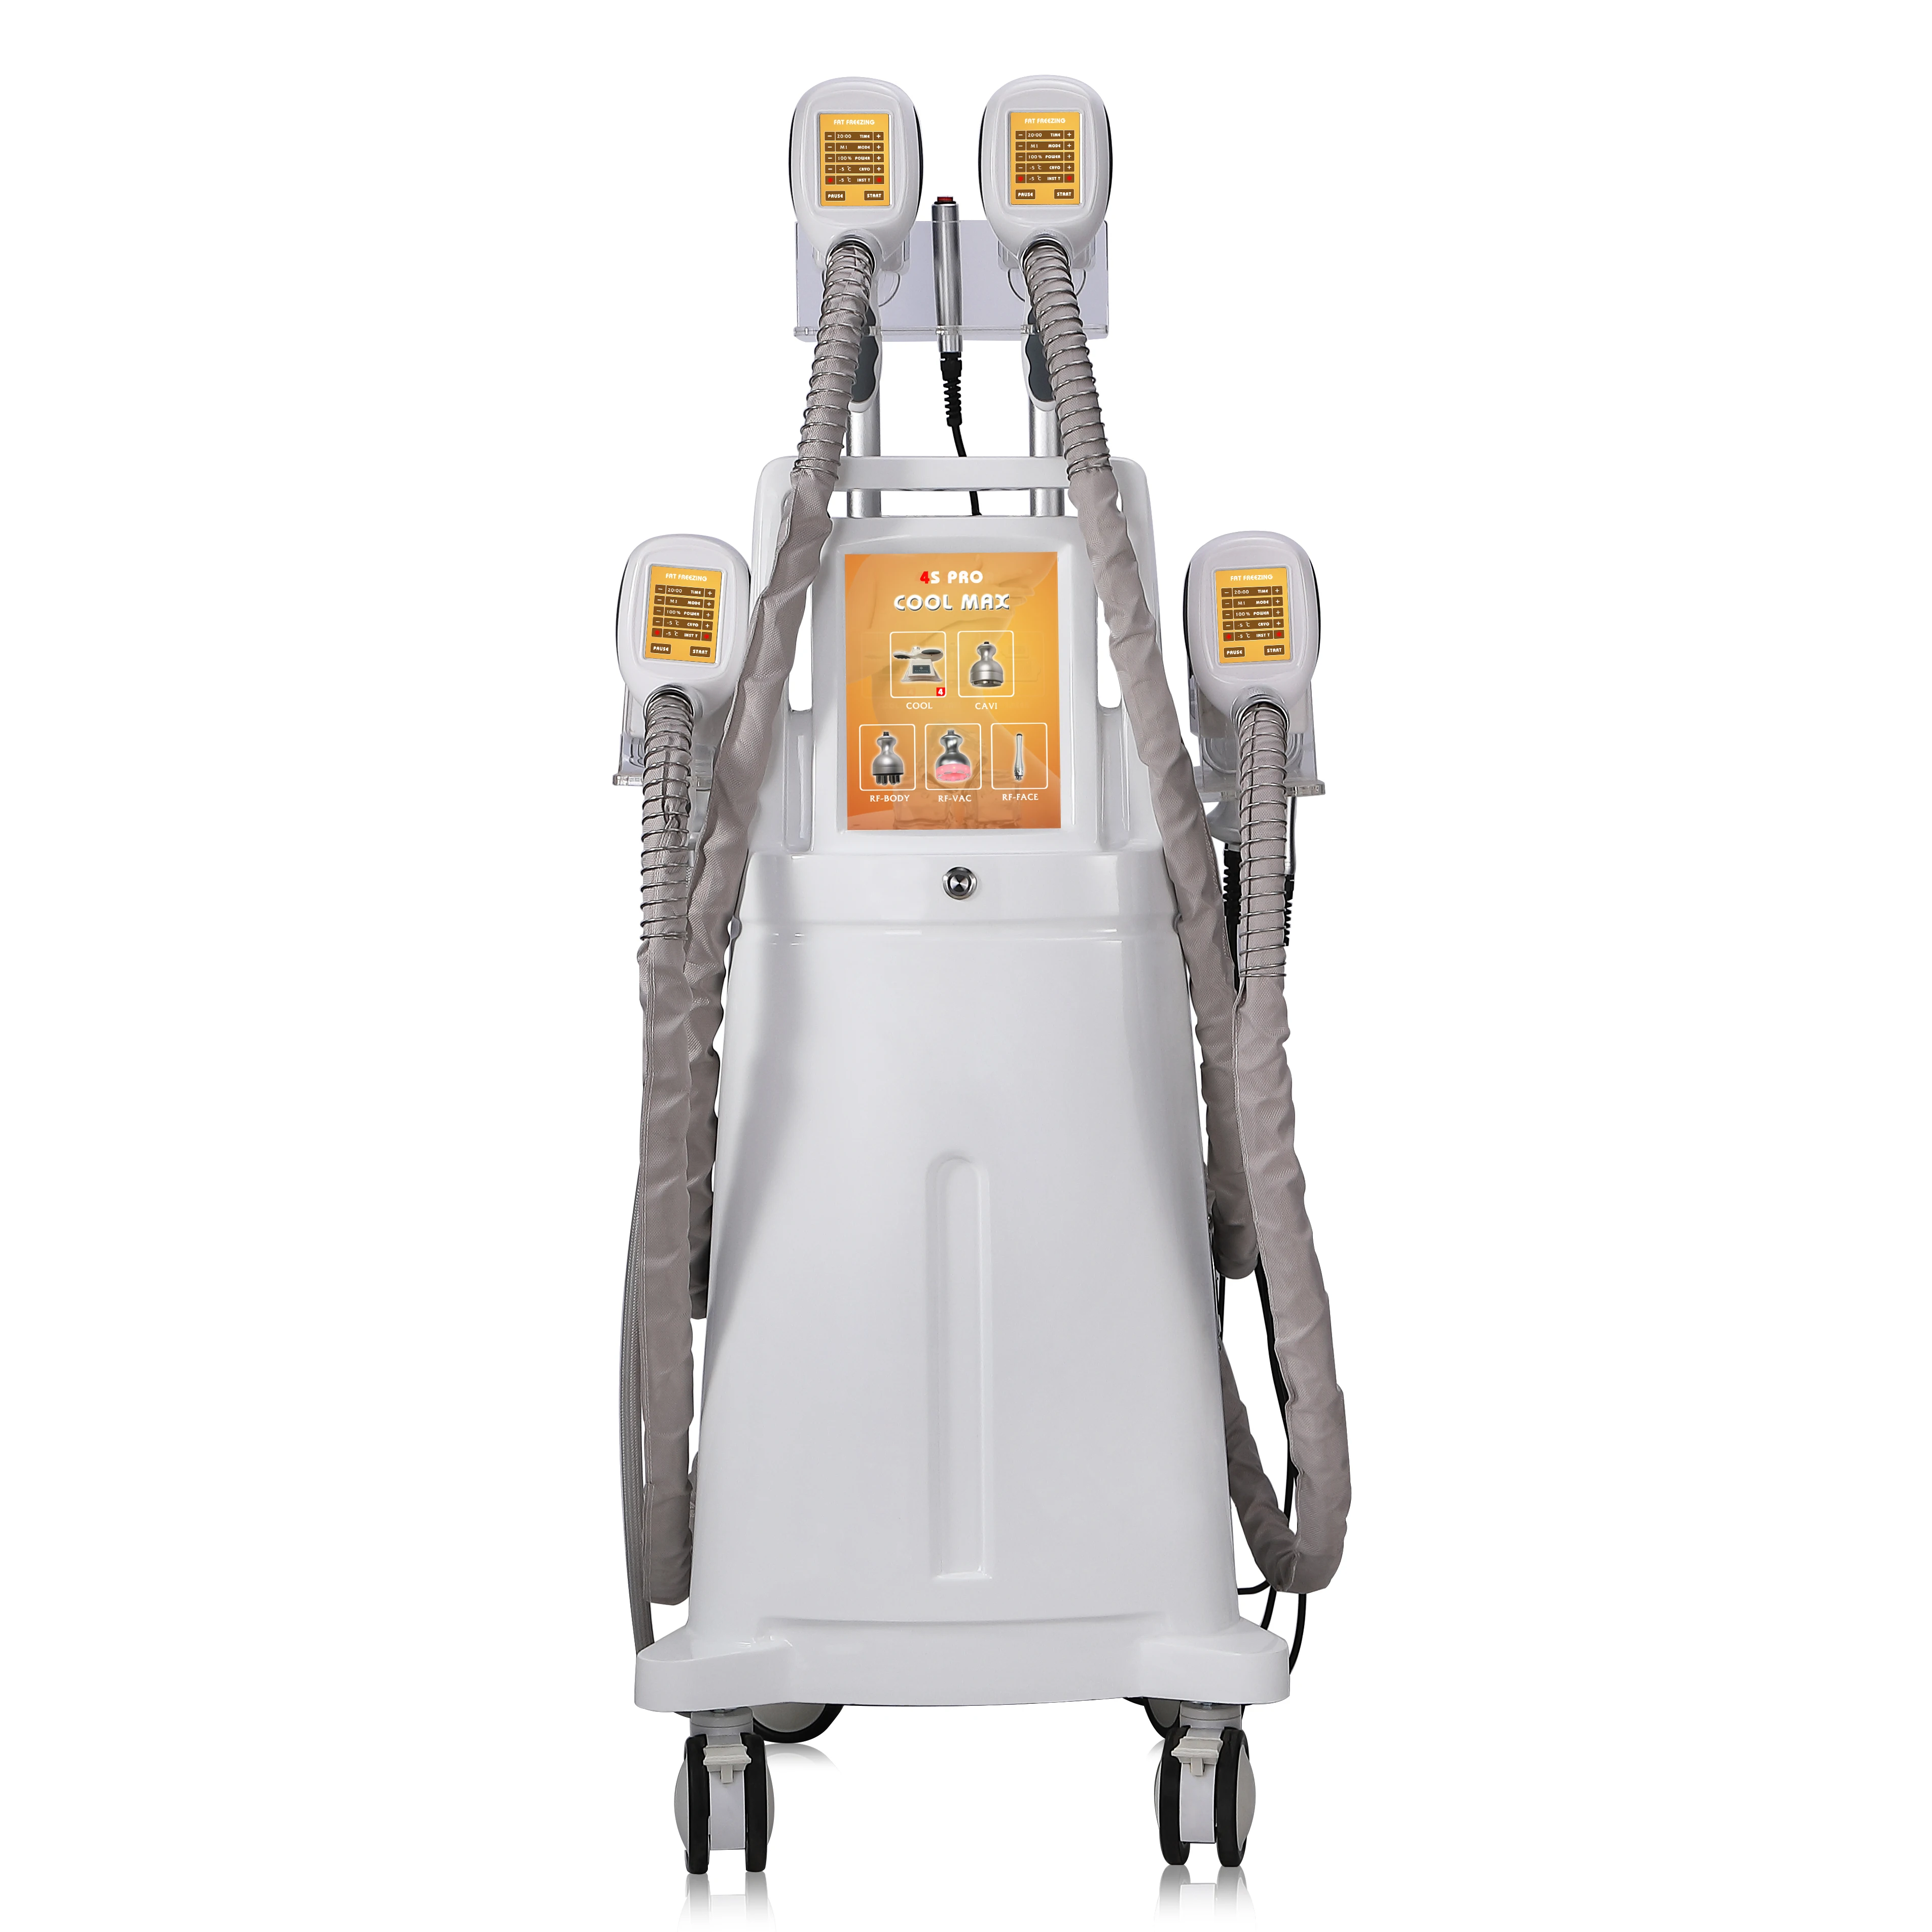 

2021 New Arrival Criolipolyse freeze fat body slimming device cryo machine weight loss Beauty Equipment